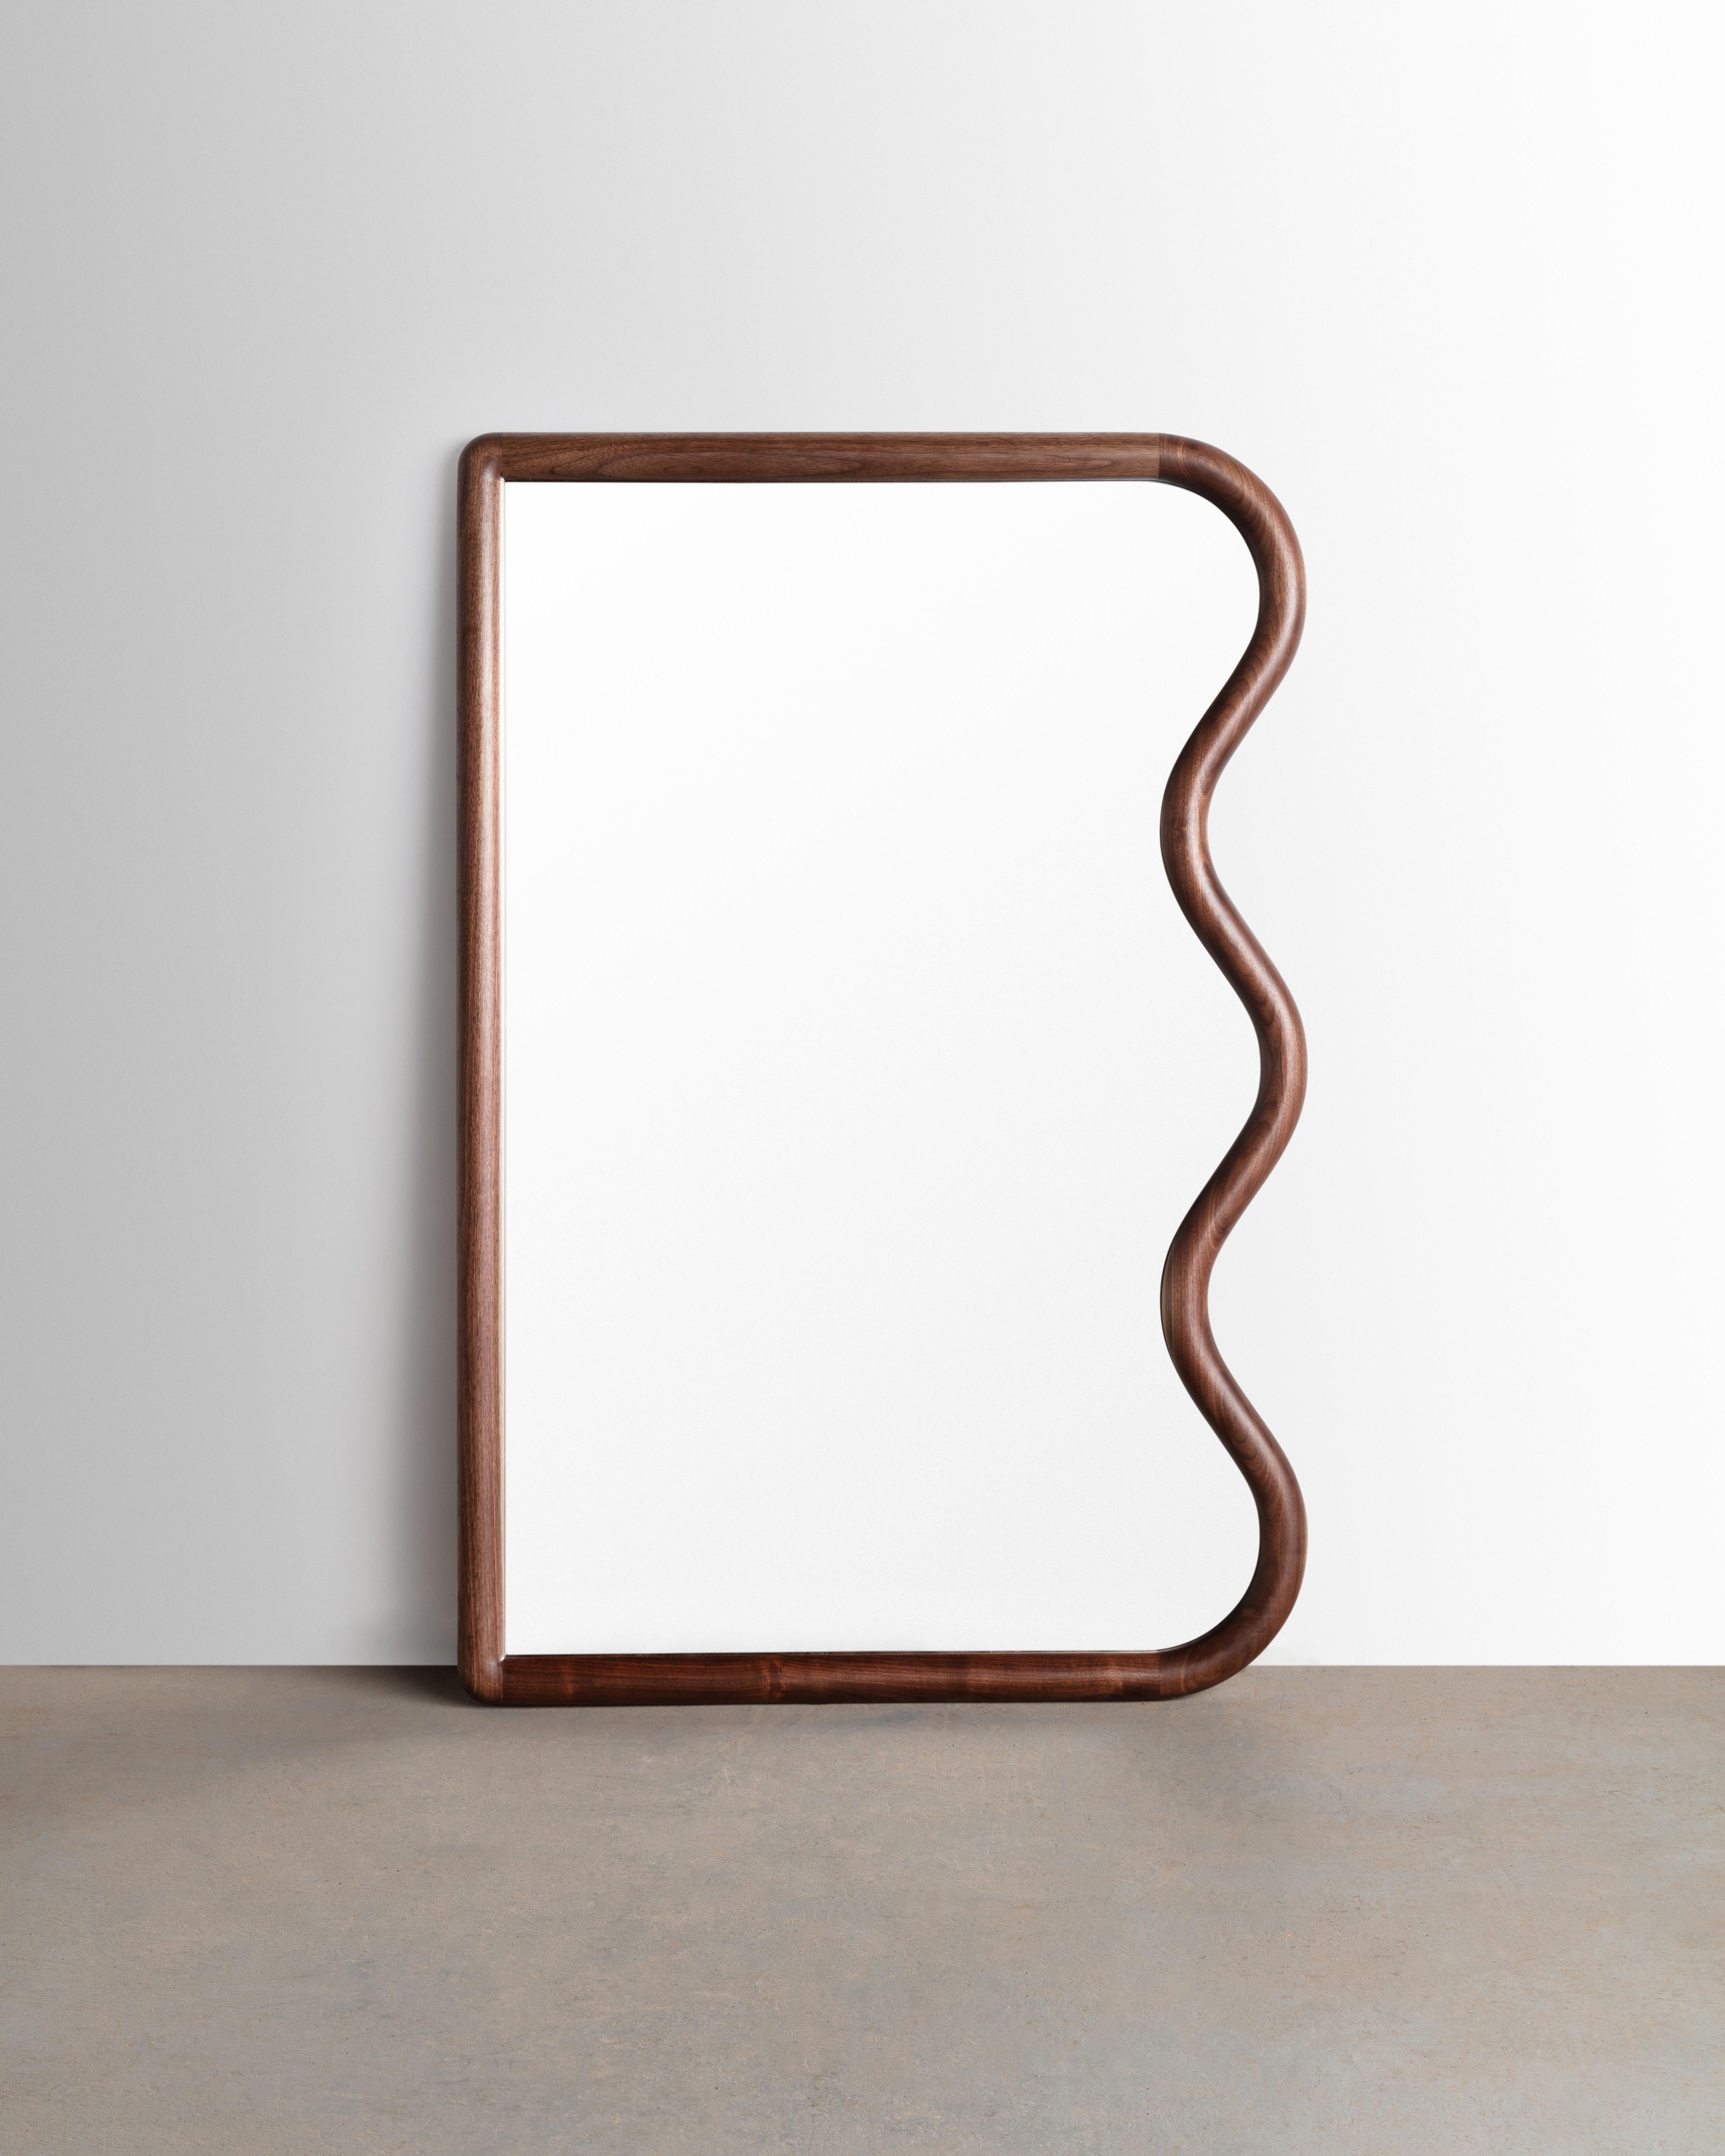 Constructed from Solid American black walnut this squiggle mirror is made to order. Each part is hand sculpted from solid slab lumber and is sure to bring a smile to any space.

Mirror can be placed leaning or we can supply custom hardware to hang